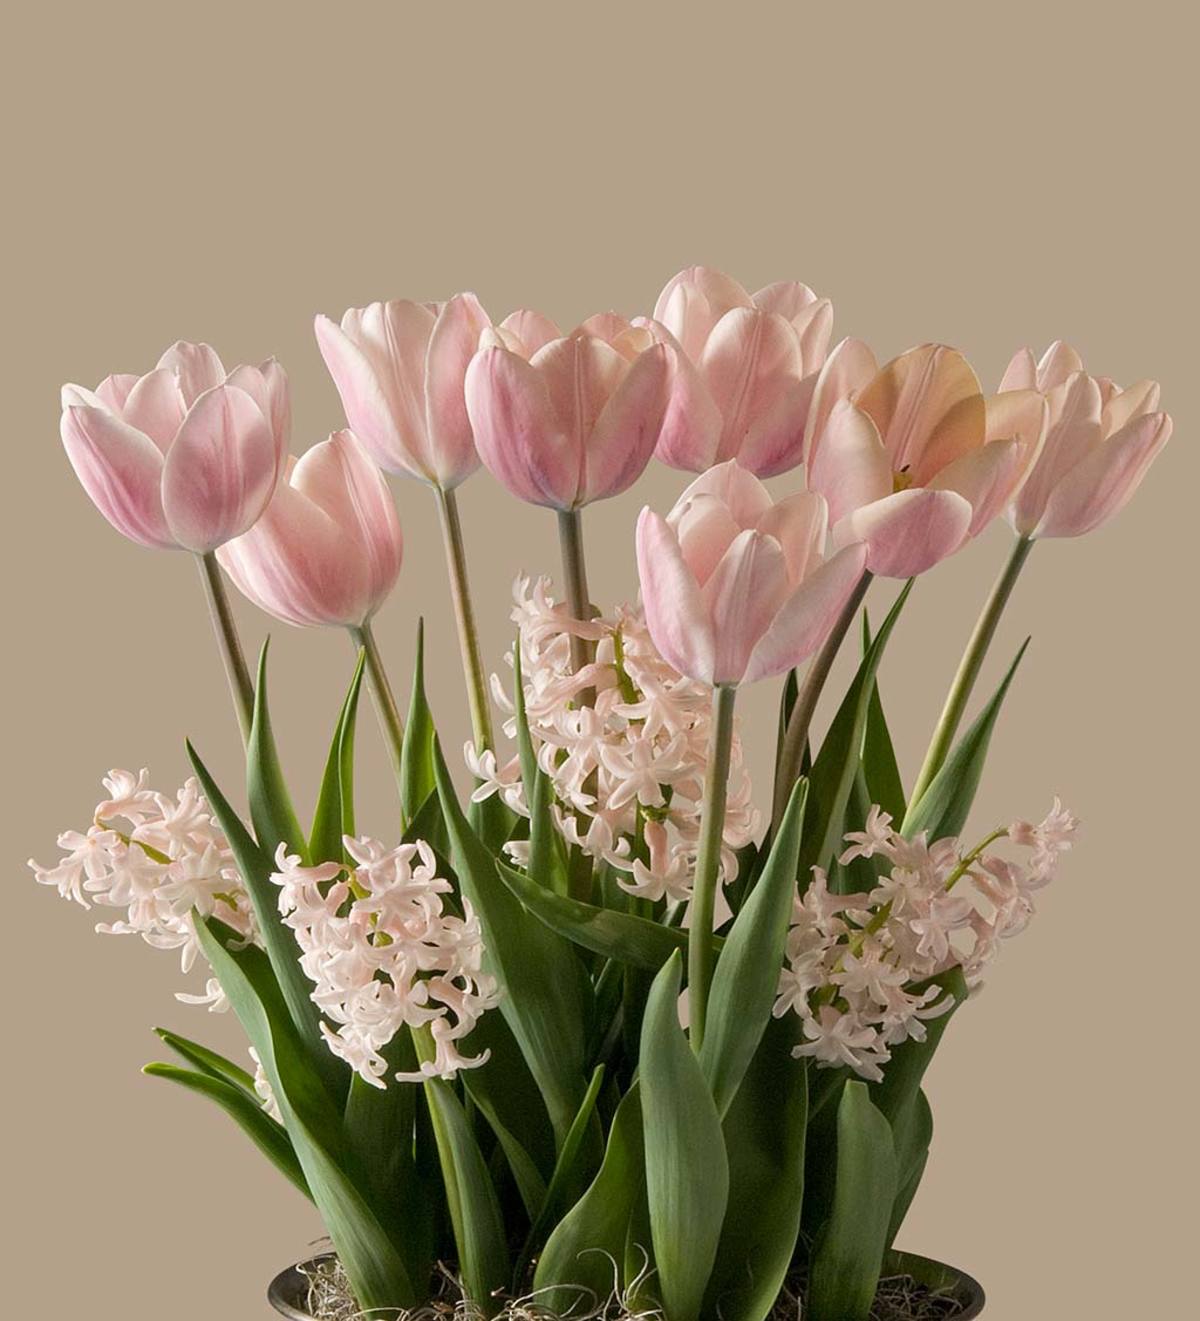 February Apricot Beauty Tulips & China Pink Hyacinths Bulbs in Root Bowl